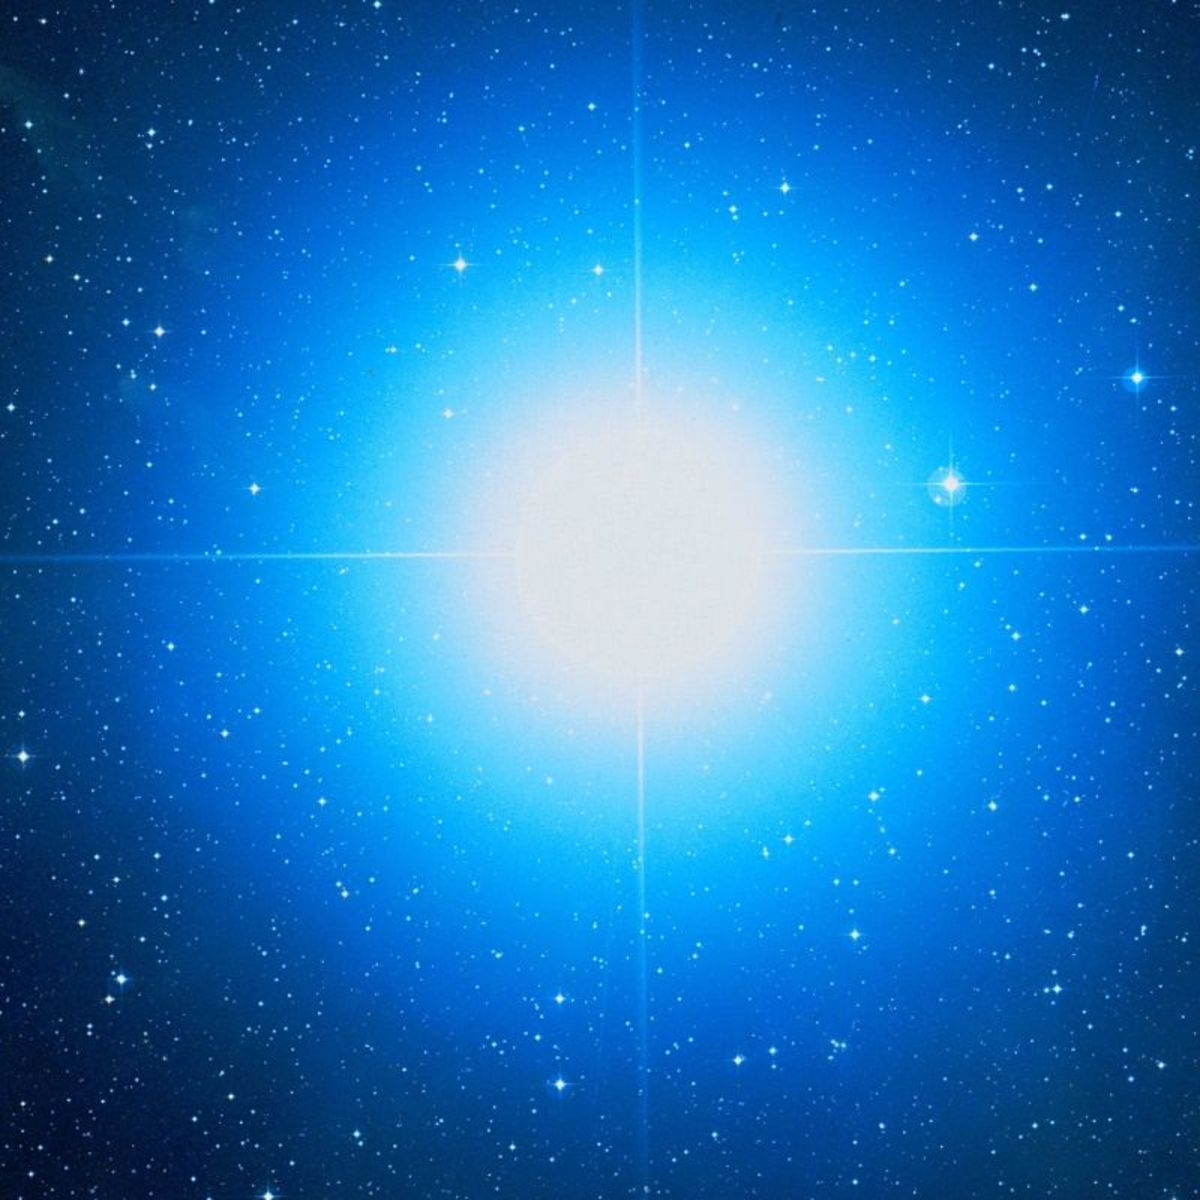 A close-up of the blue giant star, Rigel. It is 78 times larger than the Sun and the 7th brightest star in the night sky (i.e., from Earth).